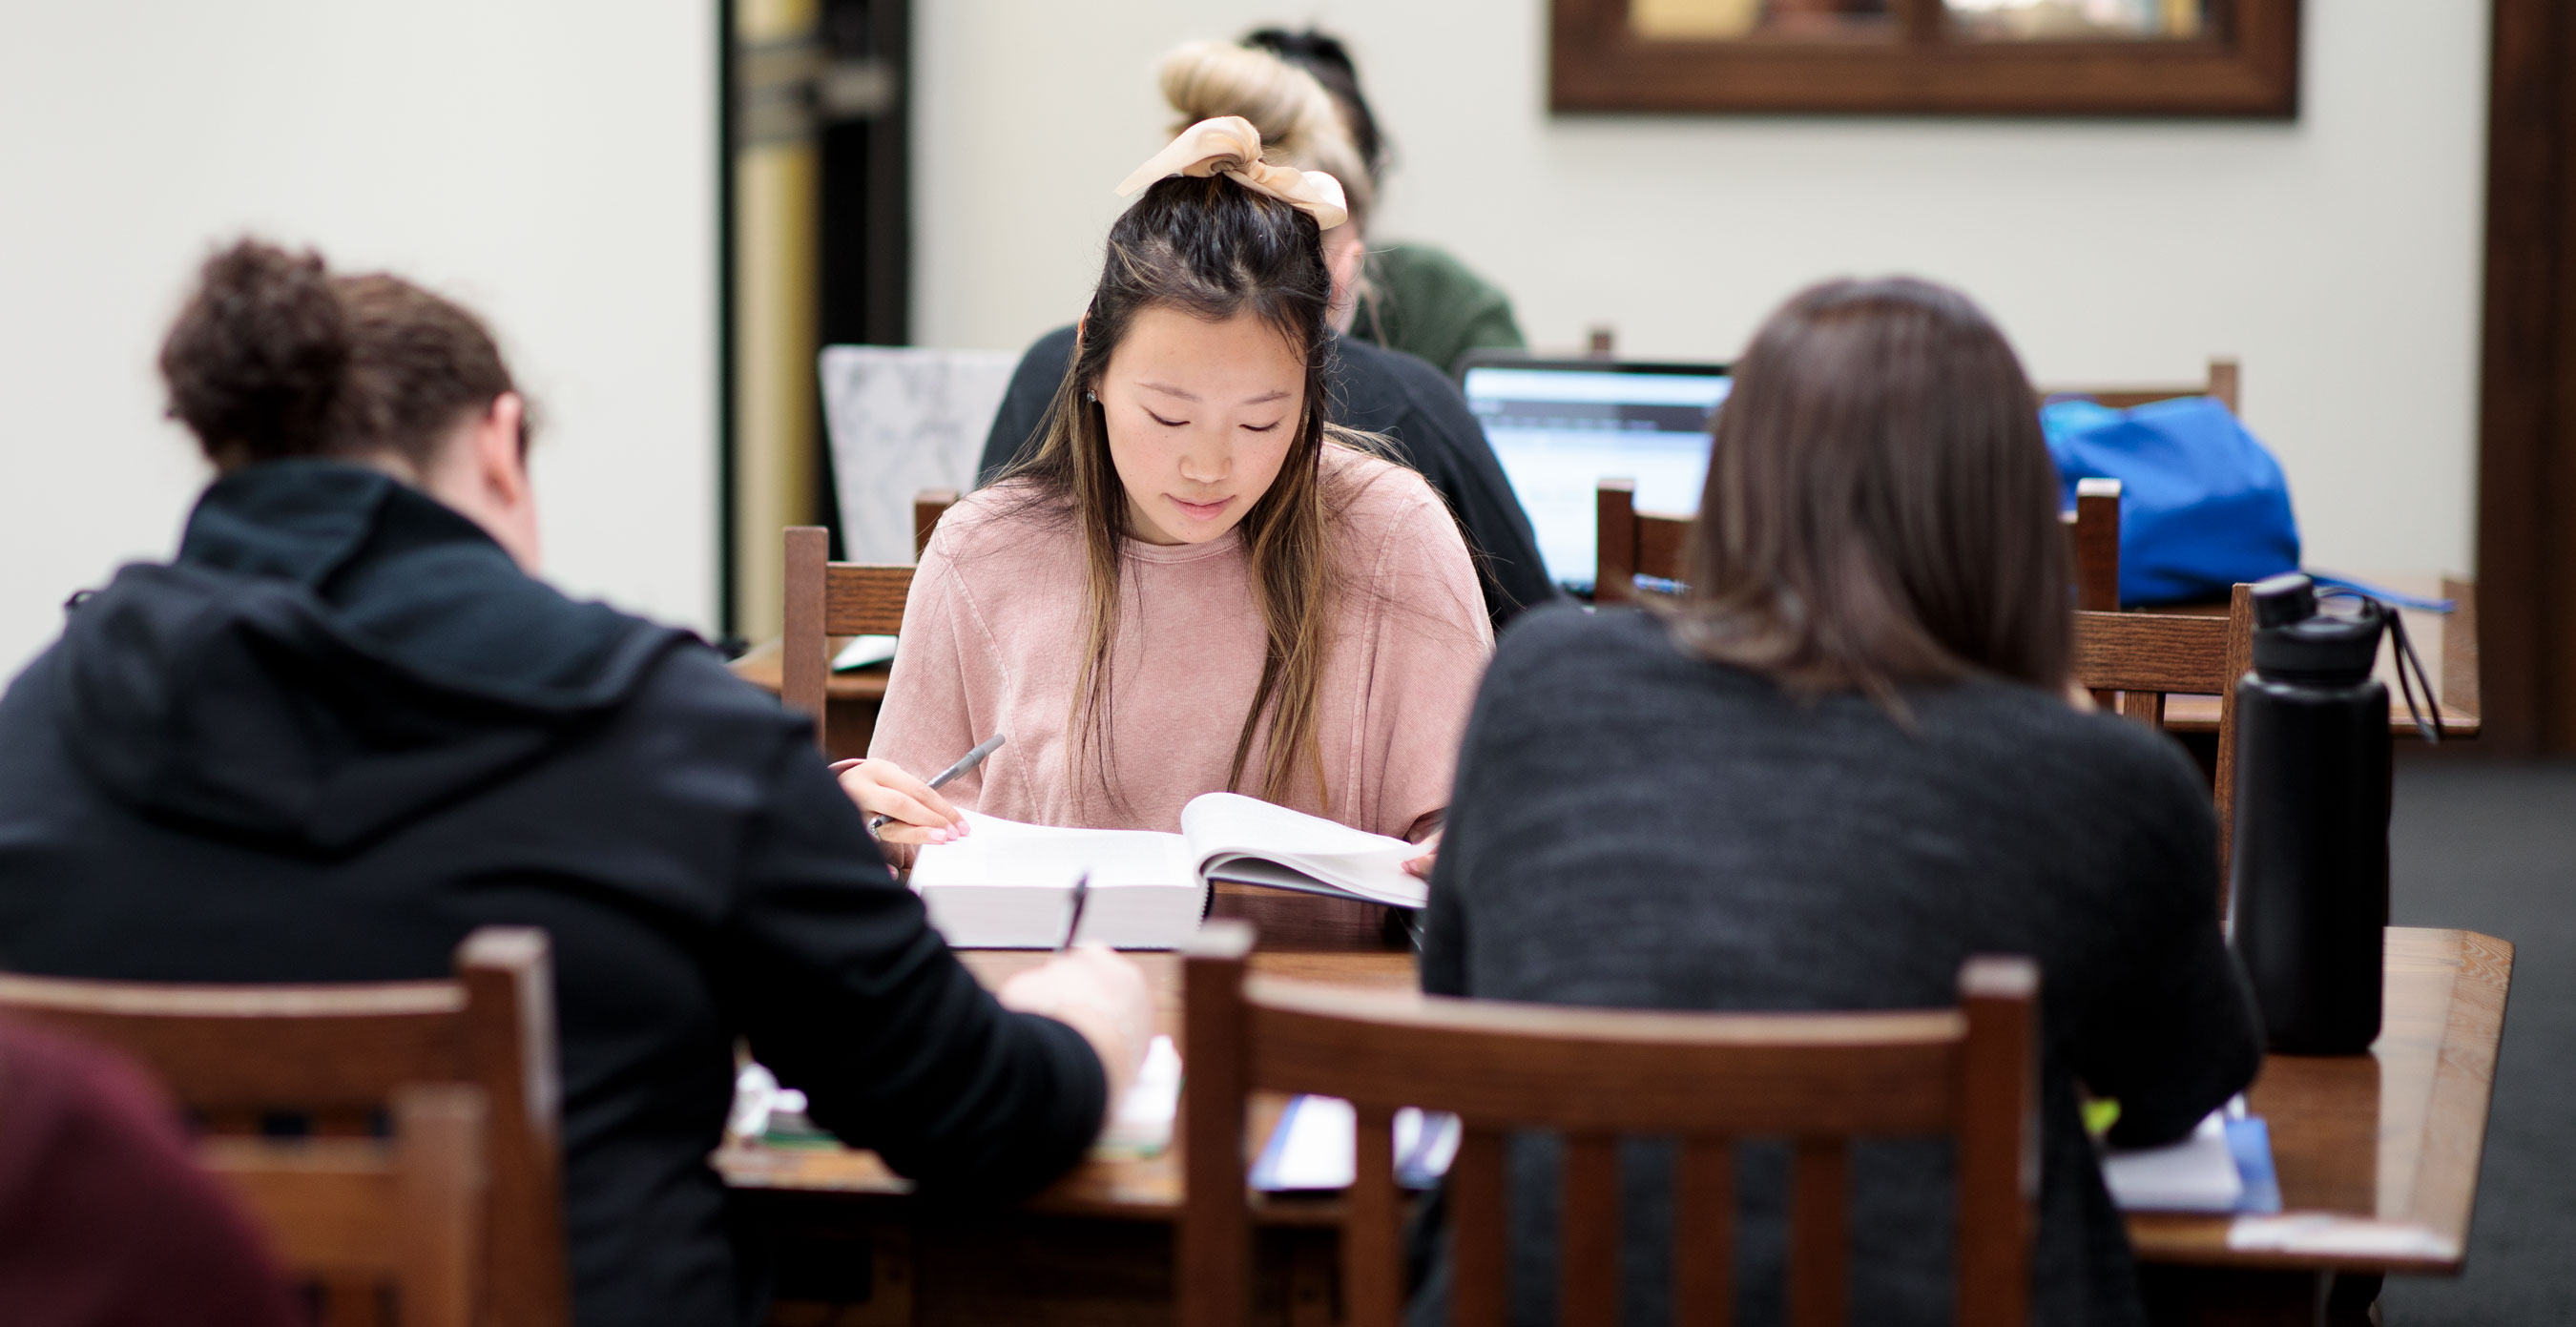 Students studying for exams in the library on campus.